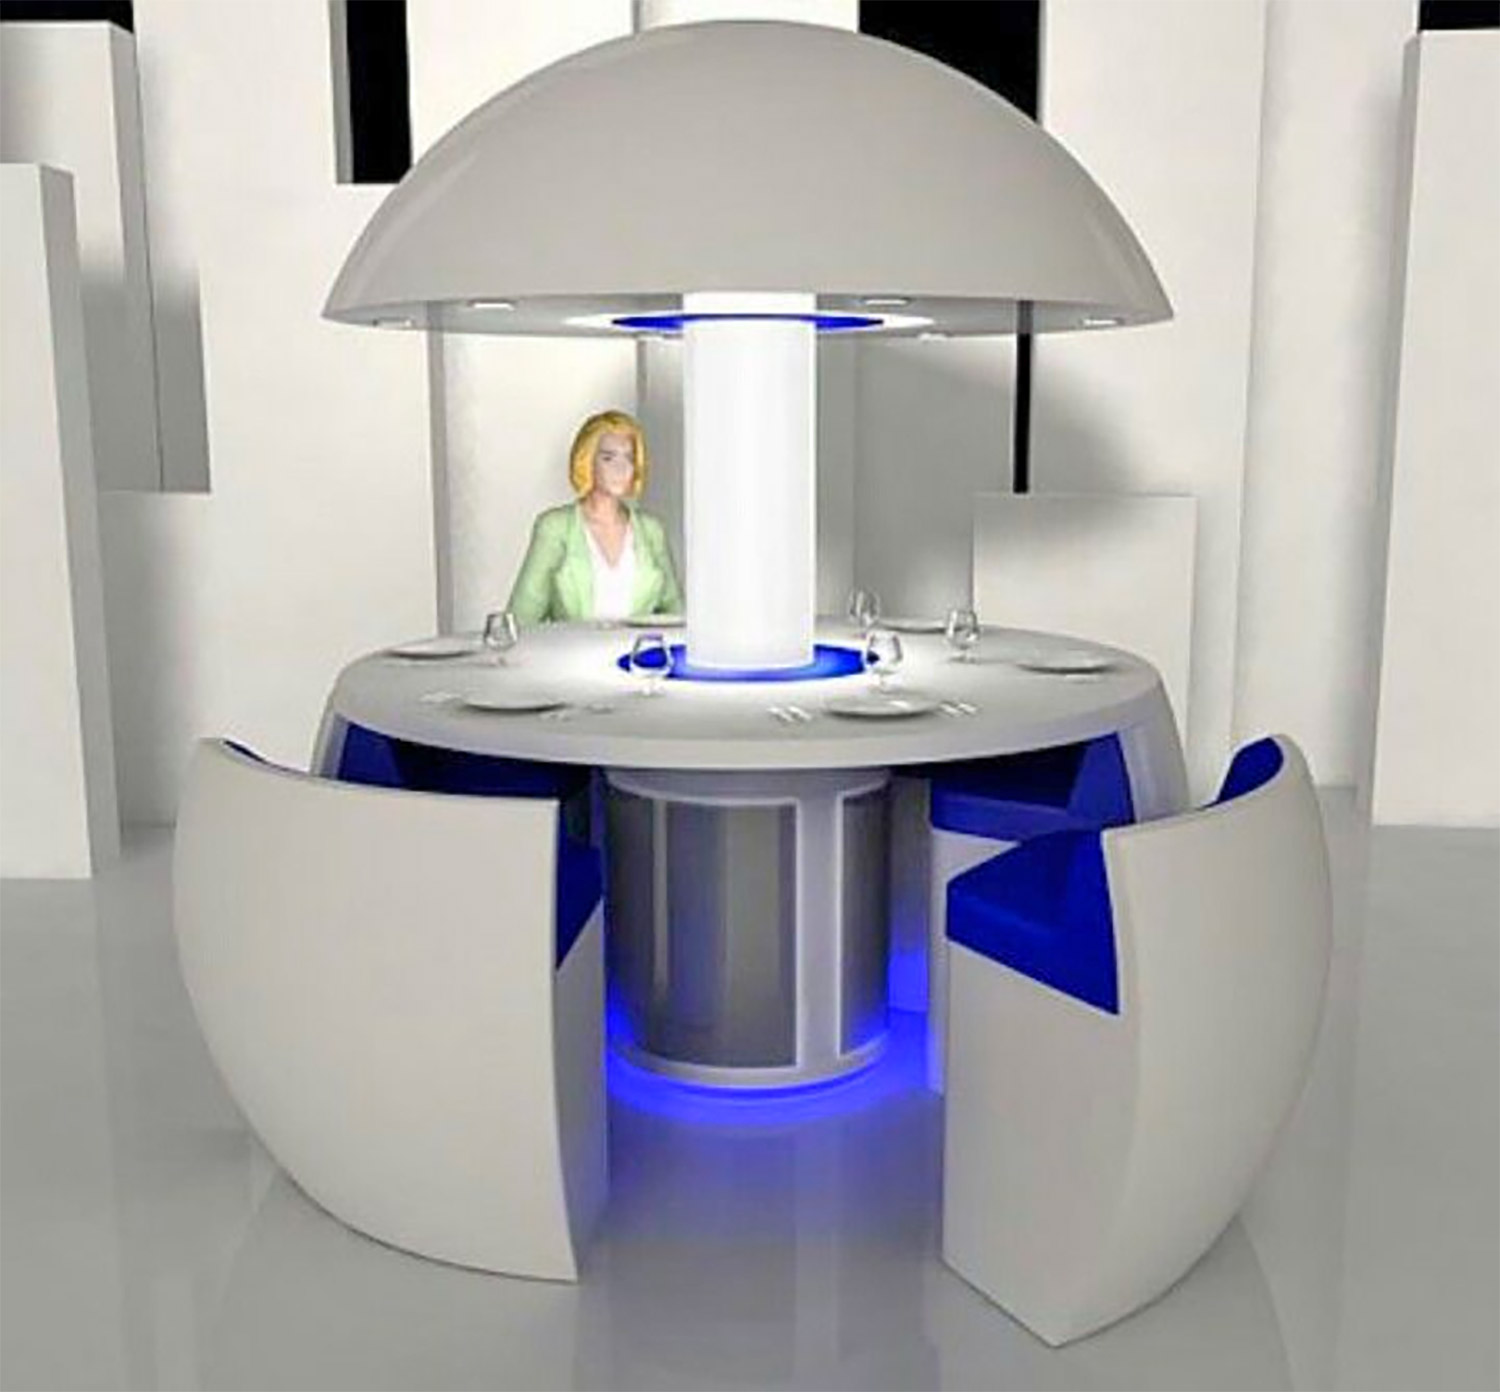 3d image of a green jacket wearing woman sitting on a white colored Kure Futuristic Dining Table Turns Into an Egg